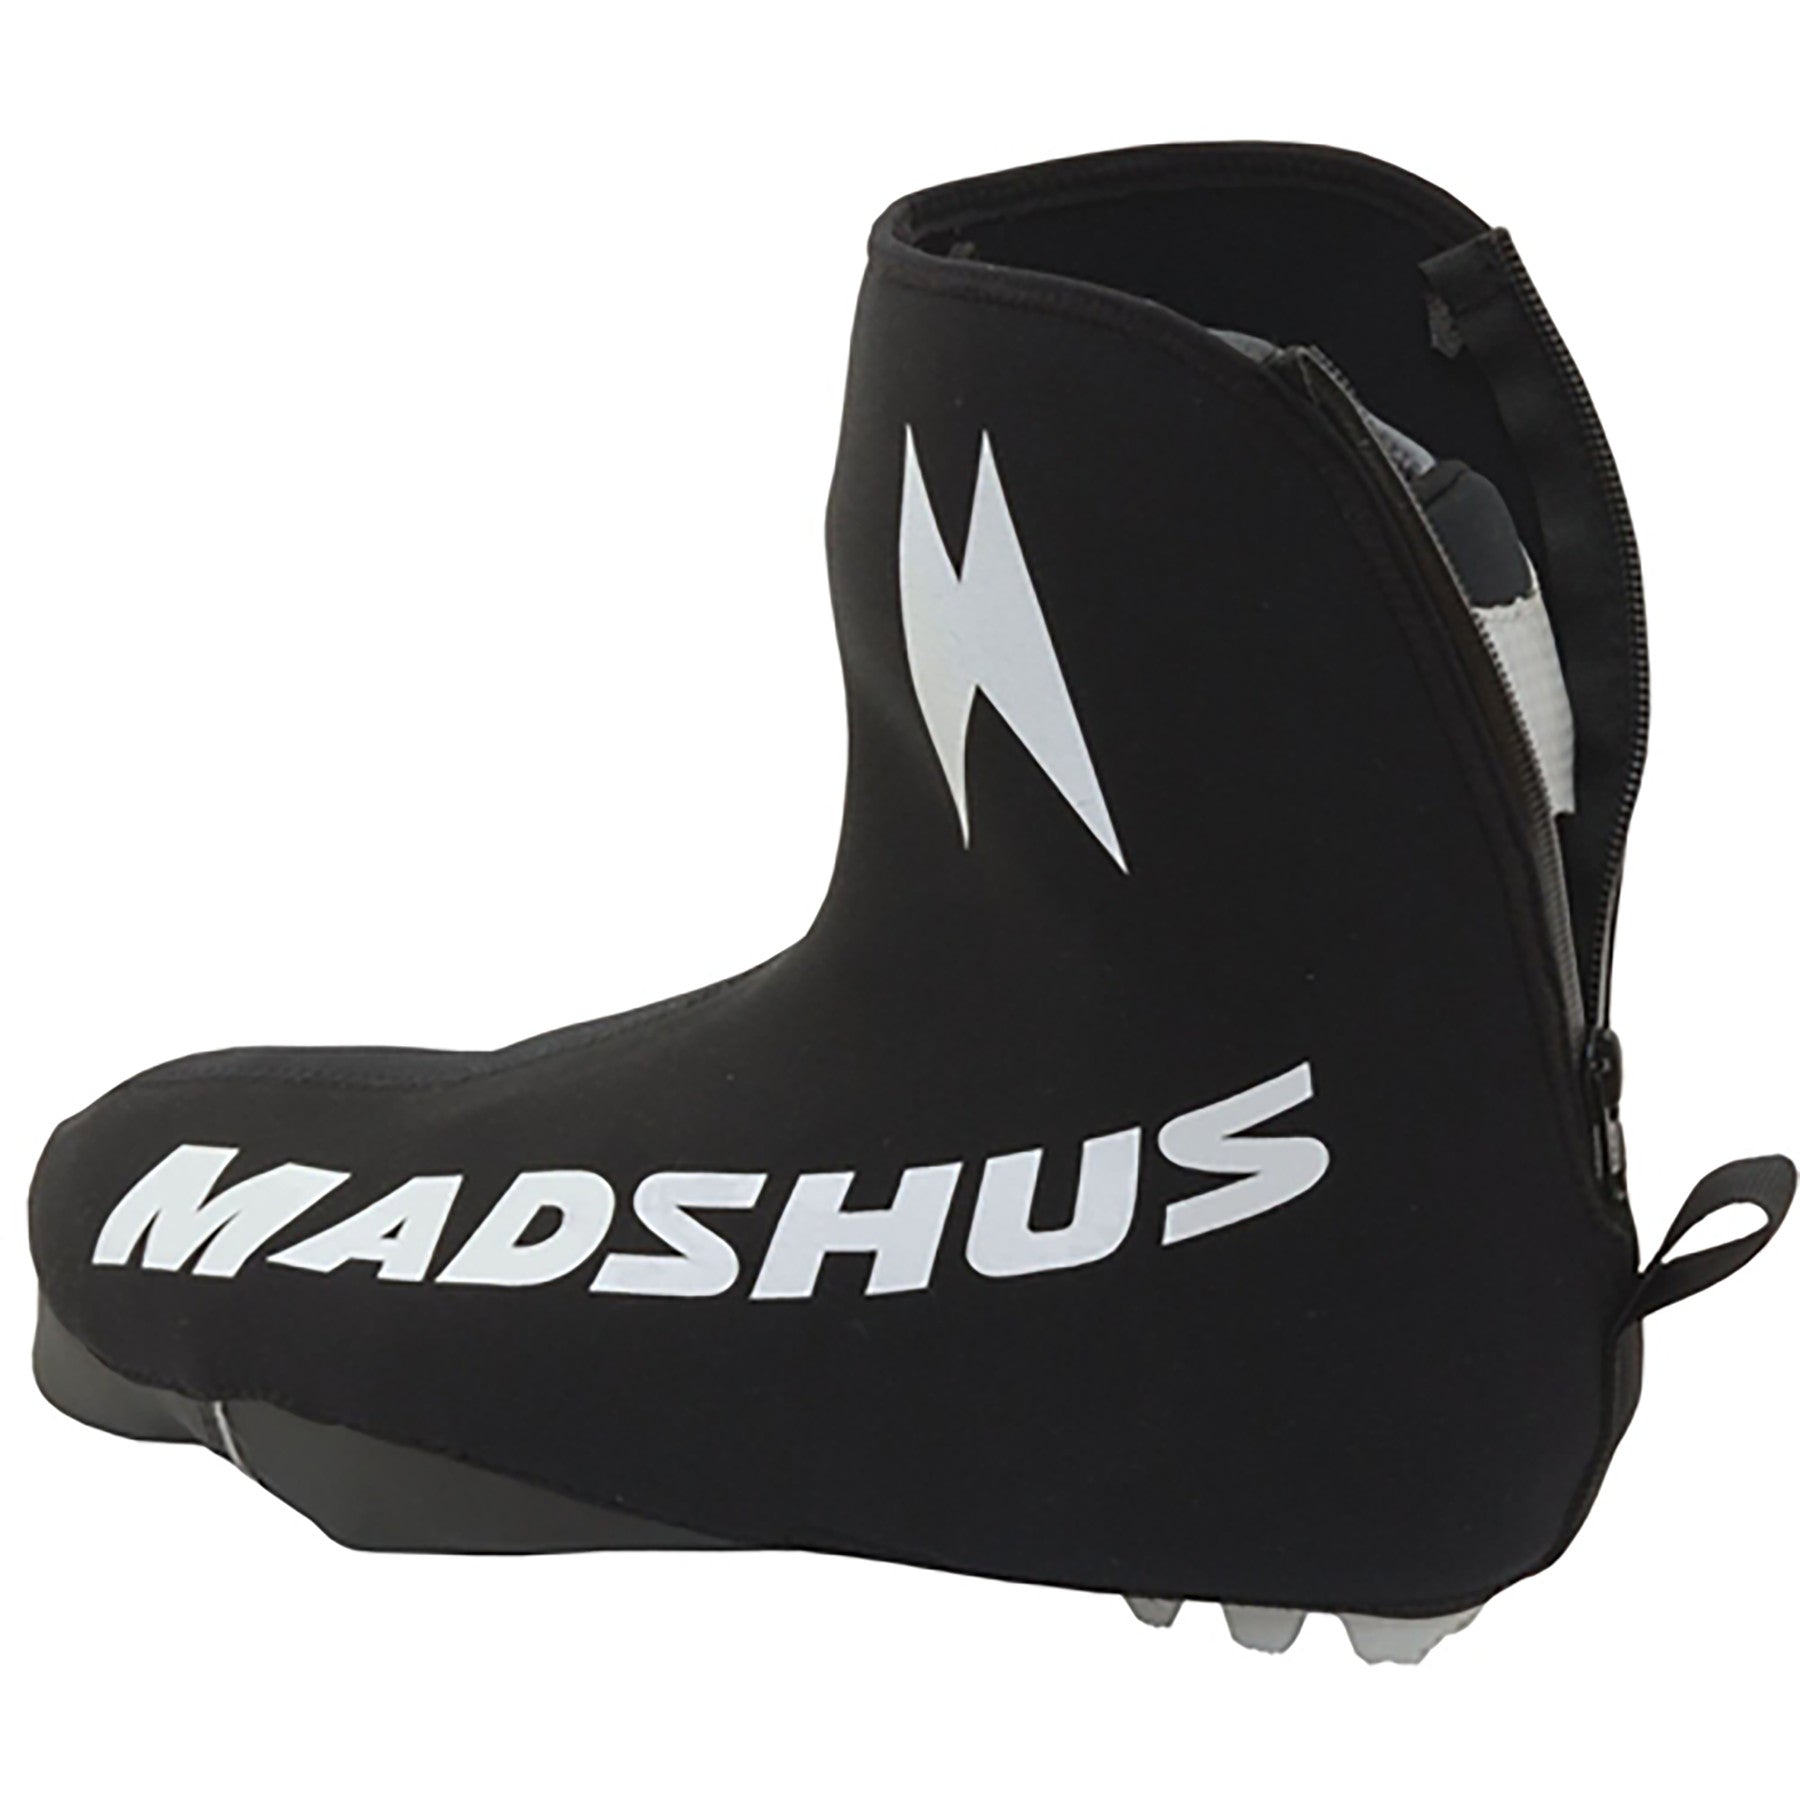 Madshus Boot Covers 2018-2019